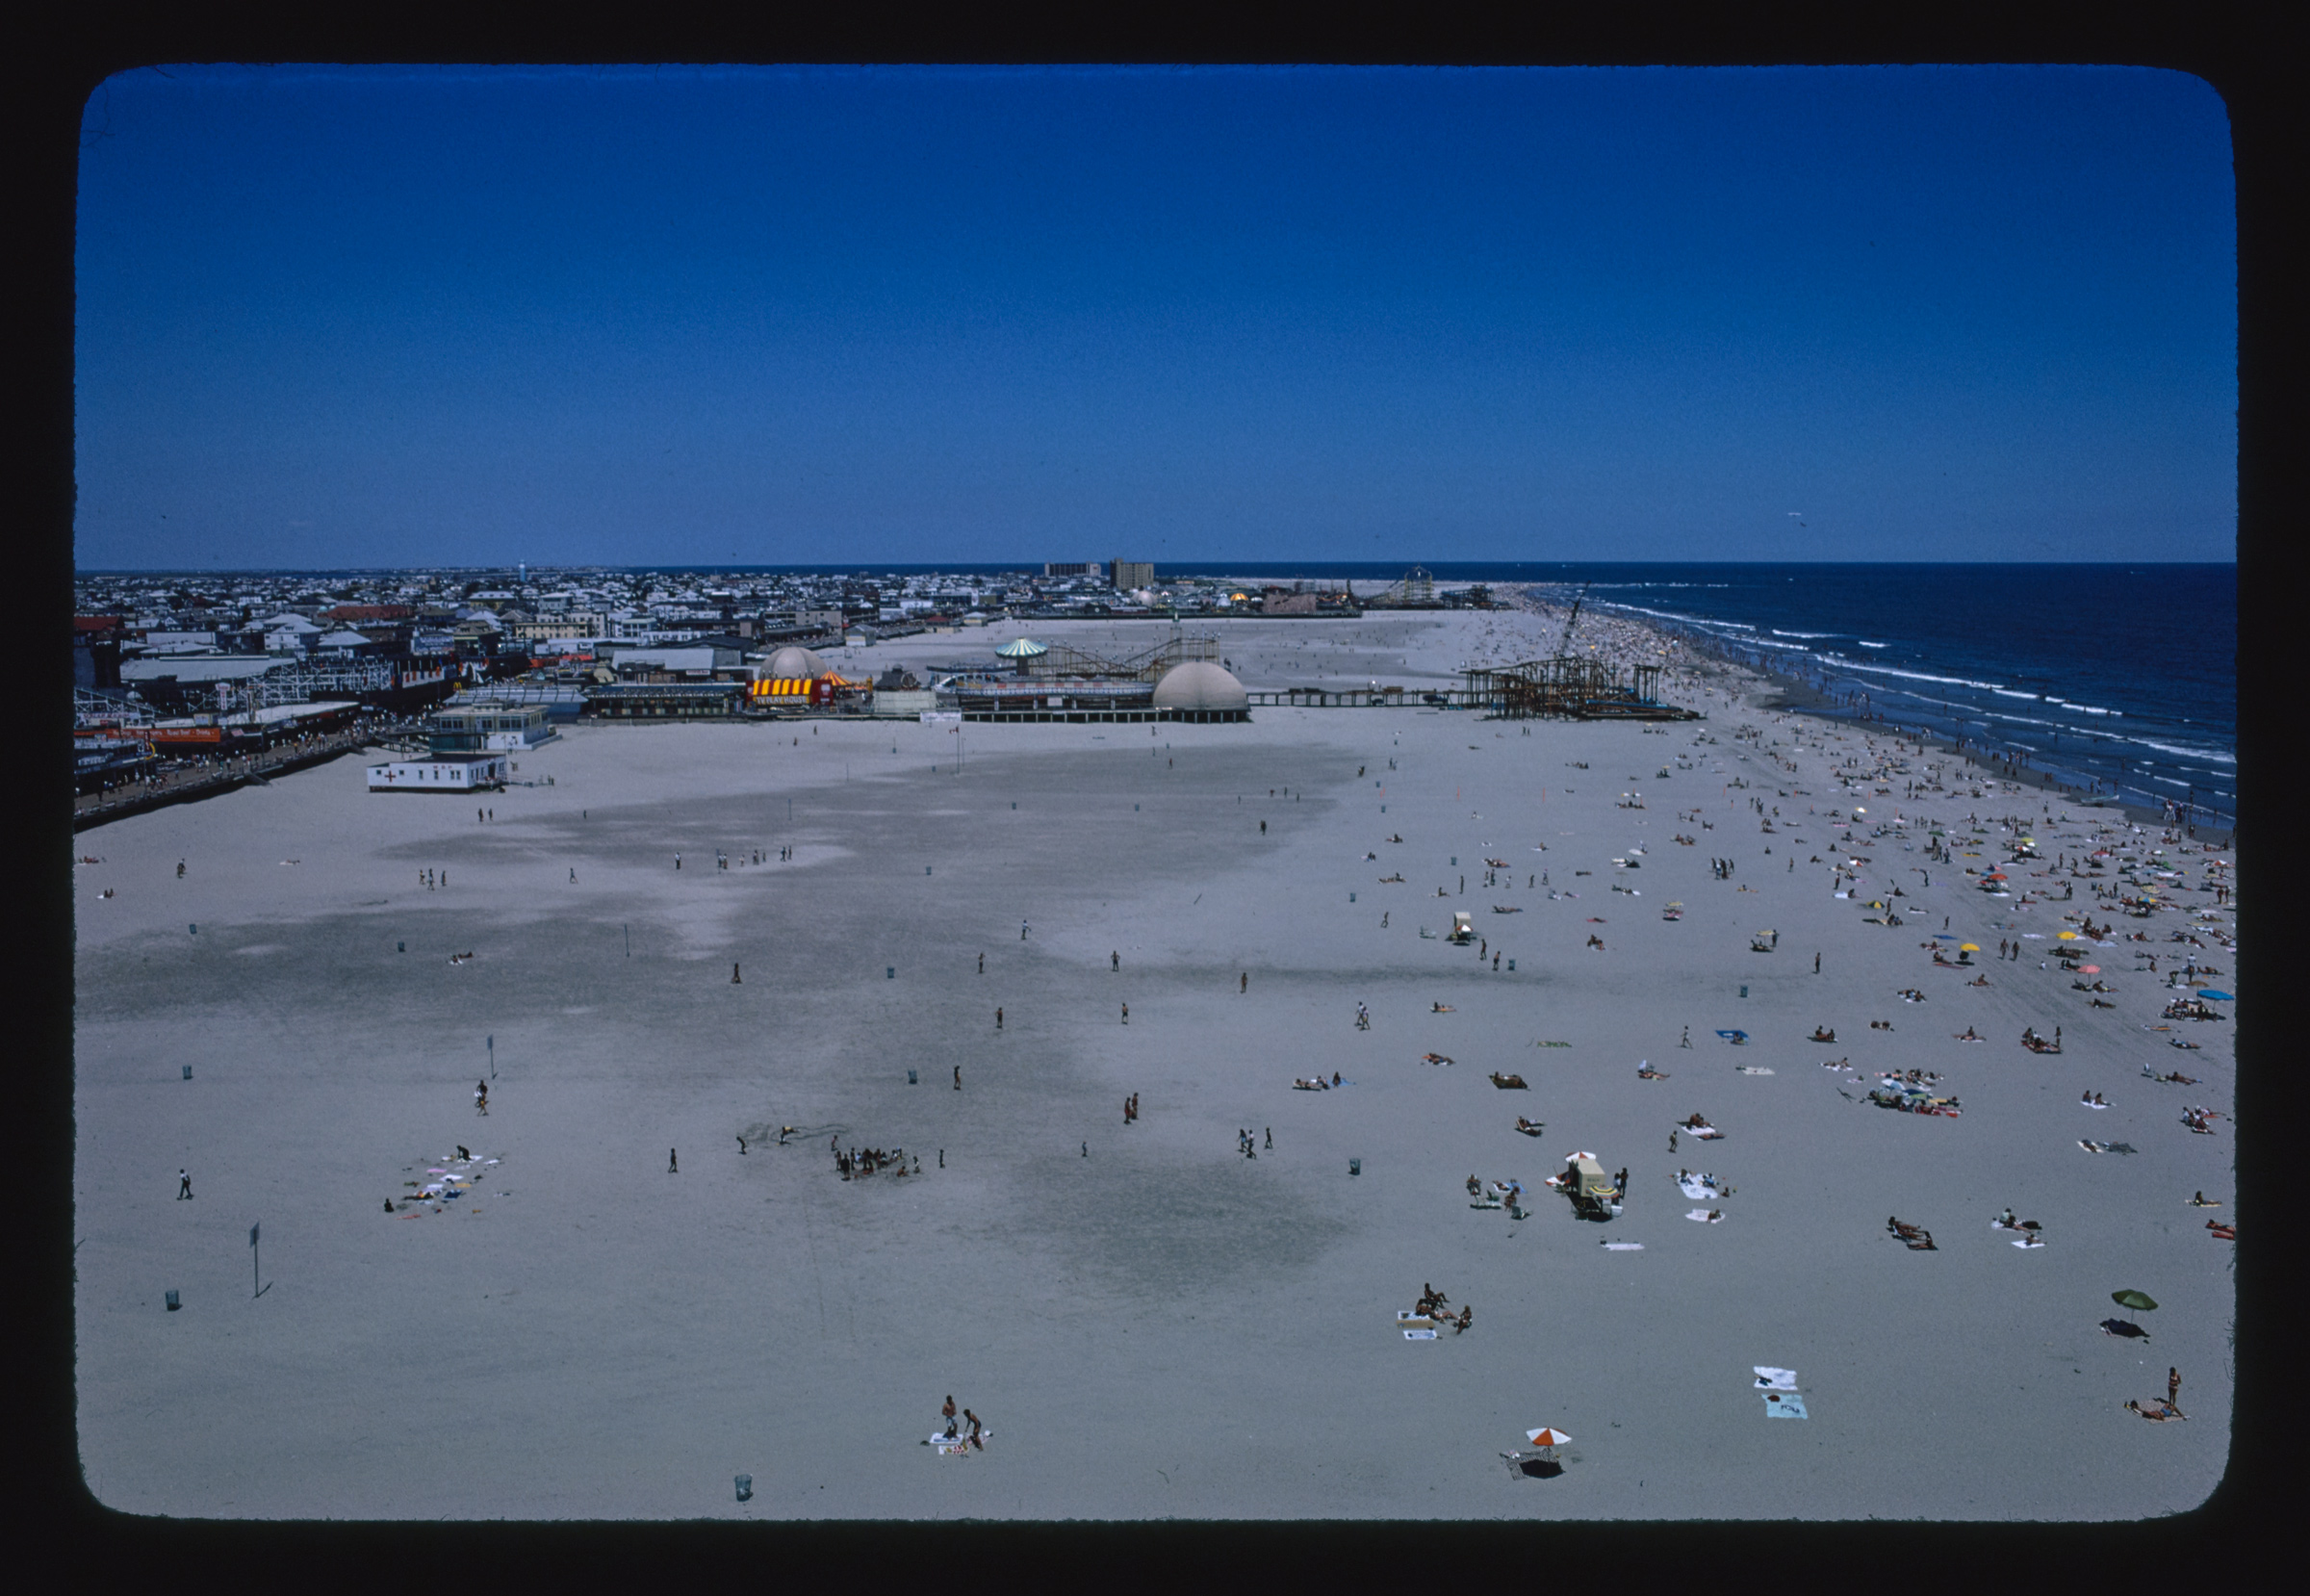 North Wildwood, New Jersey, 1978 (John Margolies Roadside America photograph archive (1972-2008), Library of Congress, Prints and Photographs Division.)